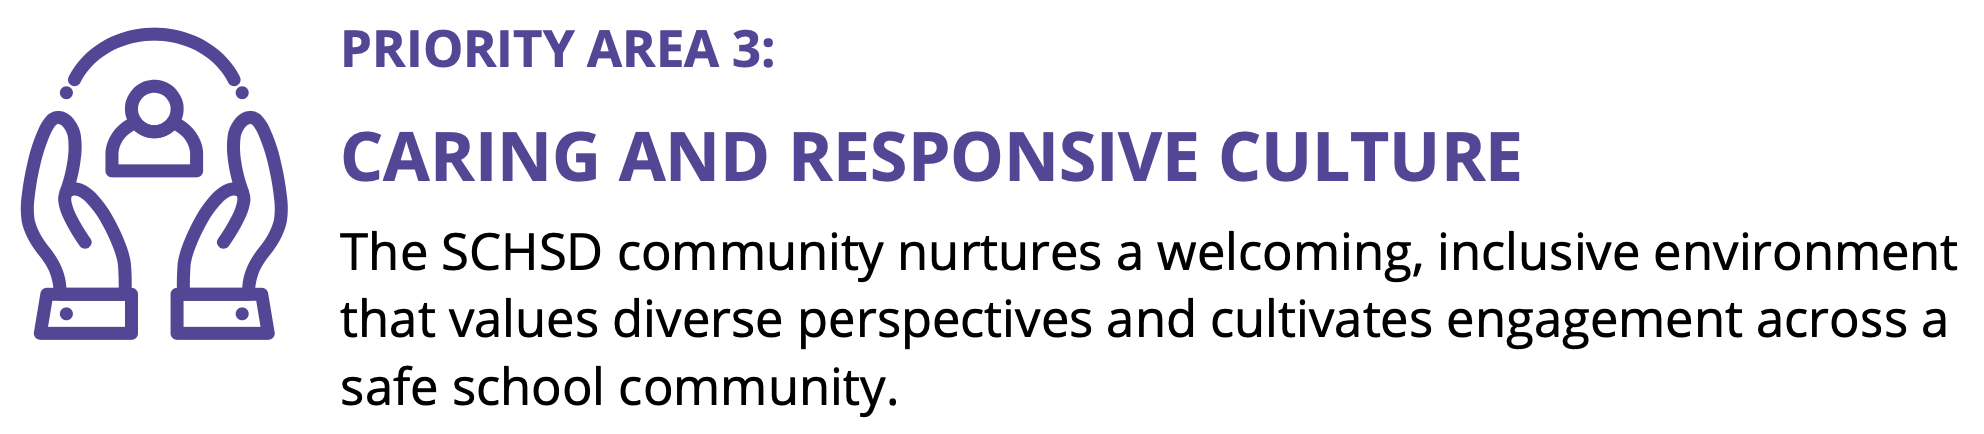 Priority Area 3:  Caring and Responsive Culture